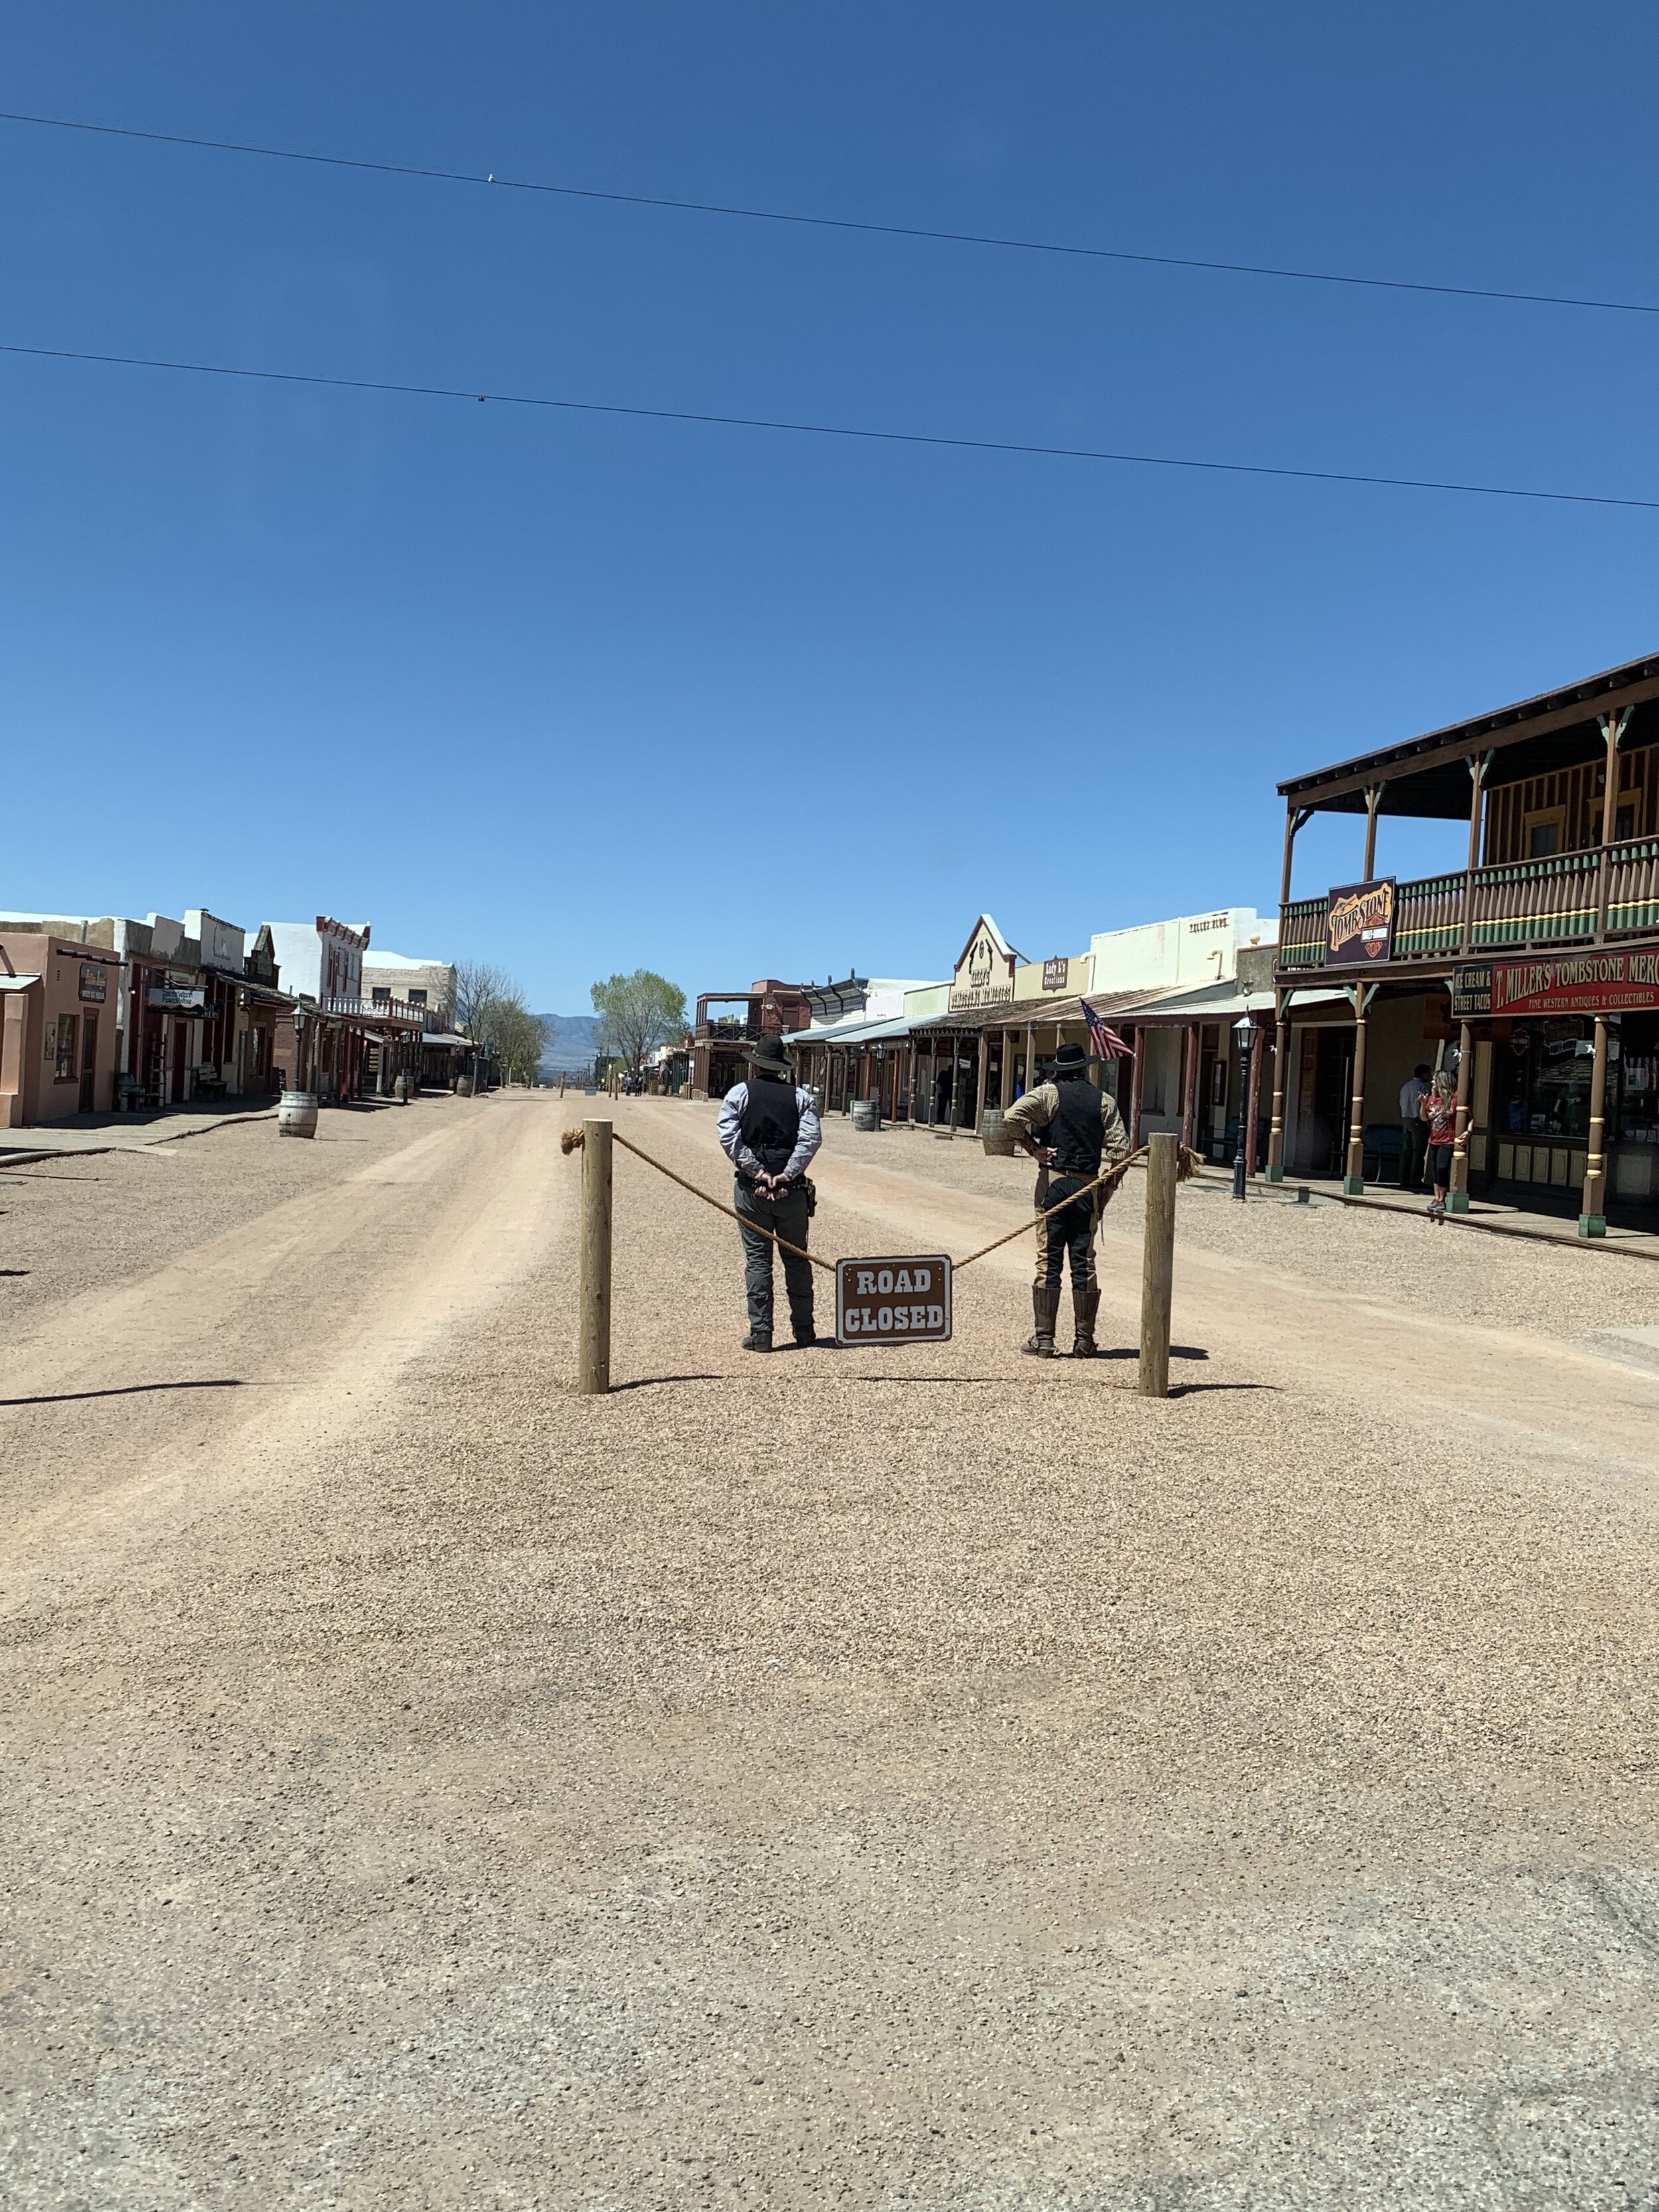  Our first stop in Arizona was the old western town of Tombstone. Normally the town would be packed with tourists exploring all things cowboy, western and outlaw but as you can see our trip was a little unusual—looking more like a ghost town. 